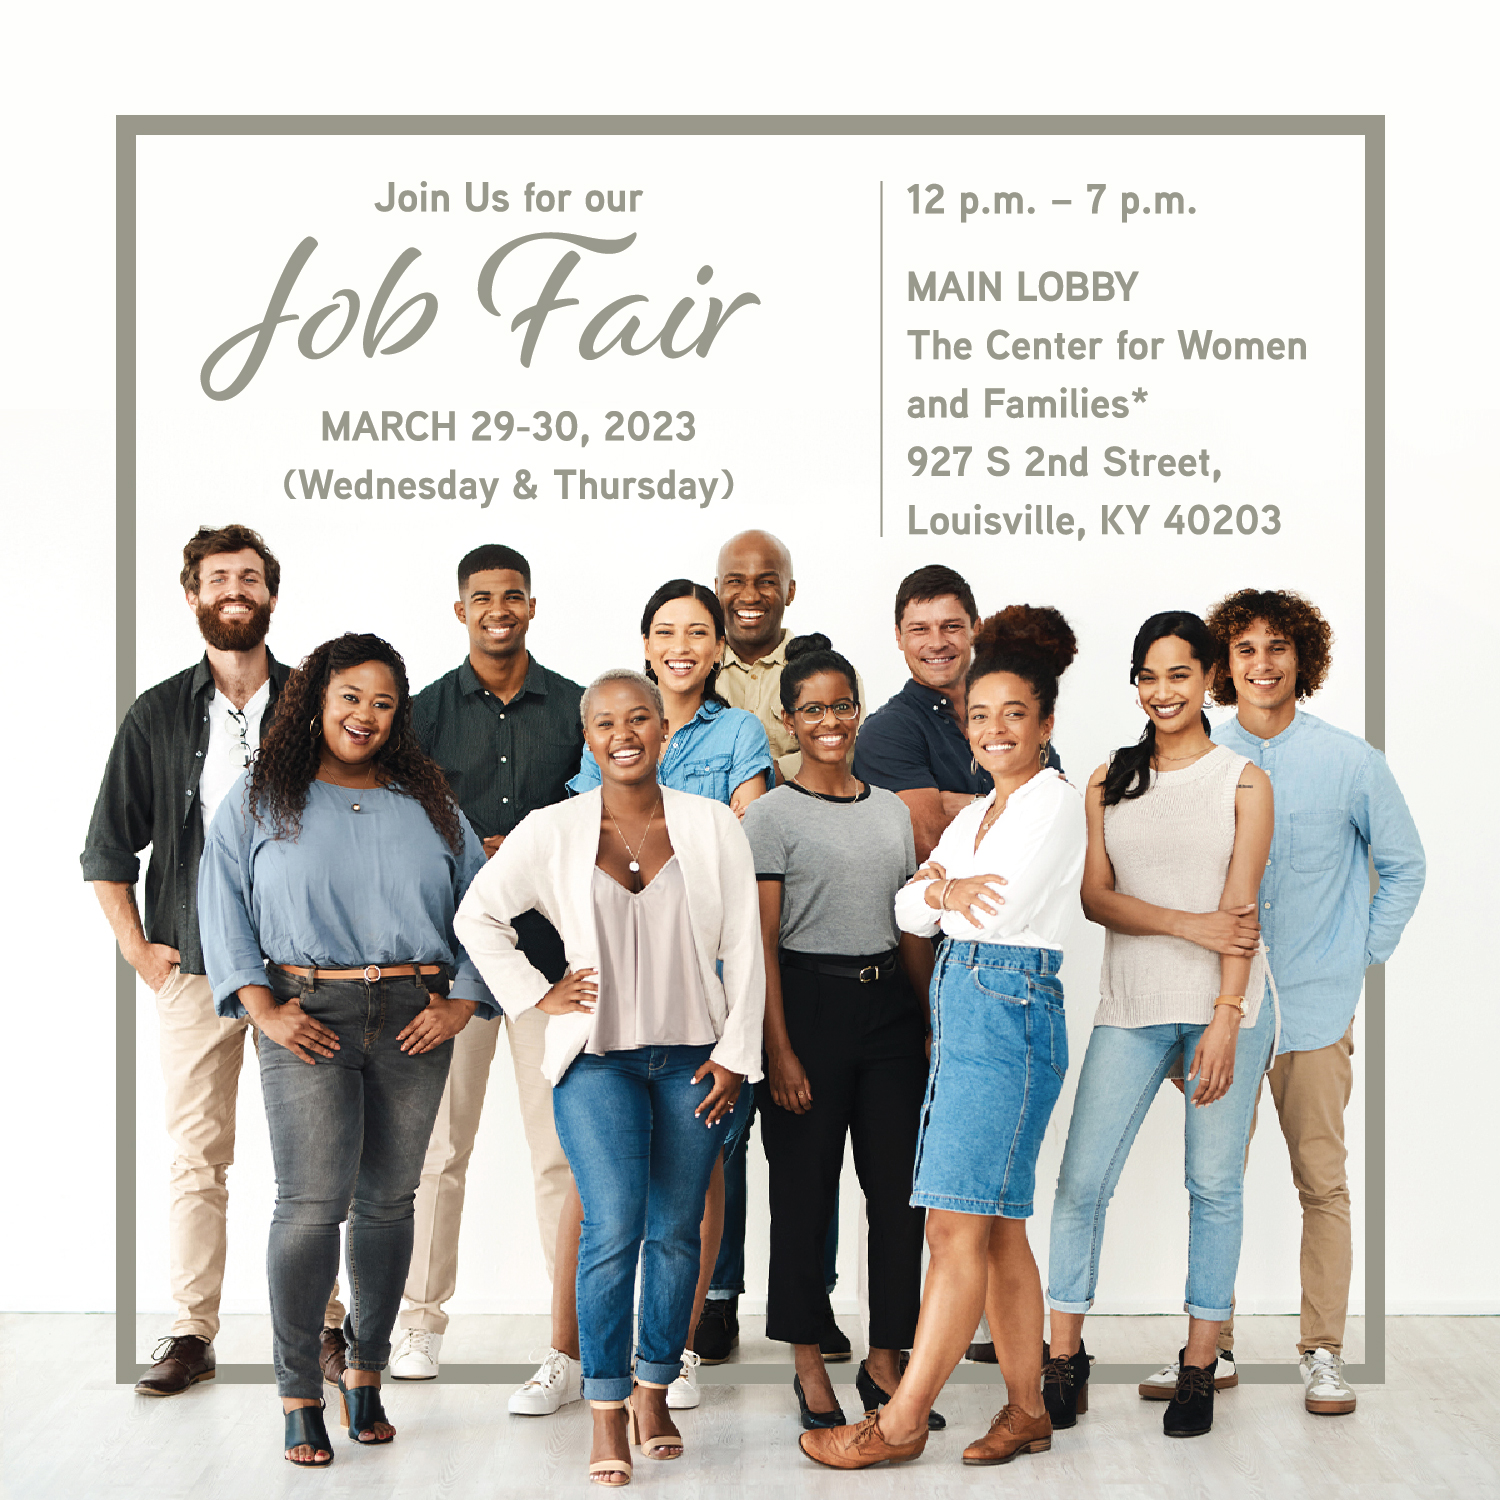 Job Fair at the Center for Women and Families March 29-30